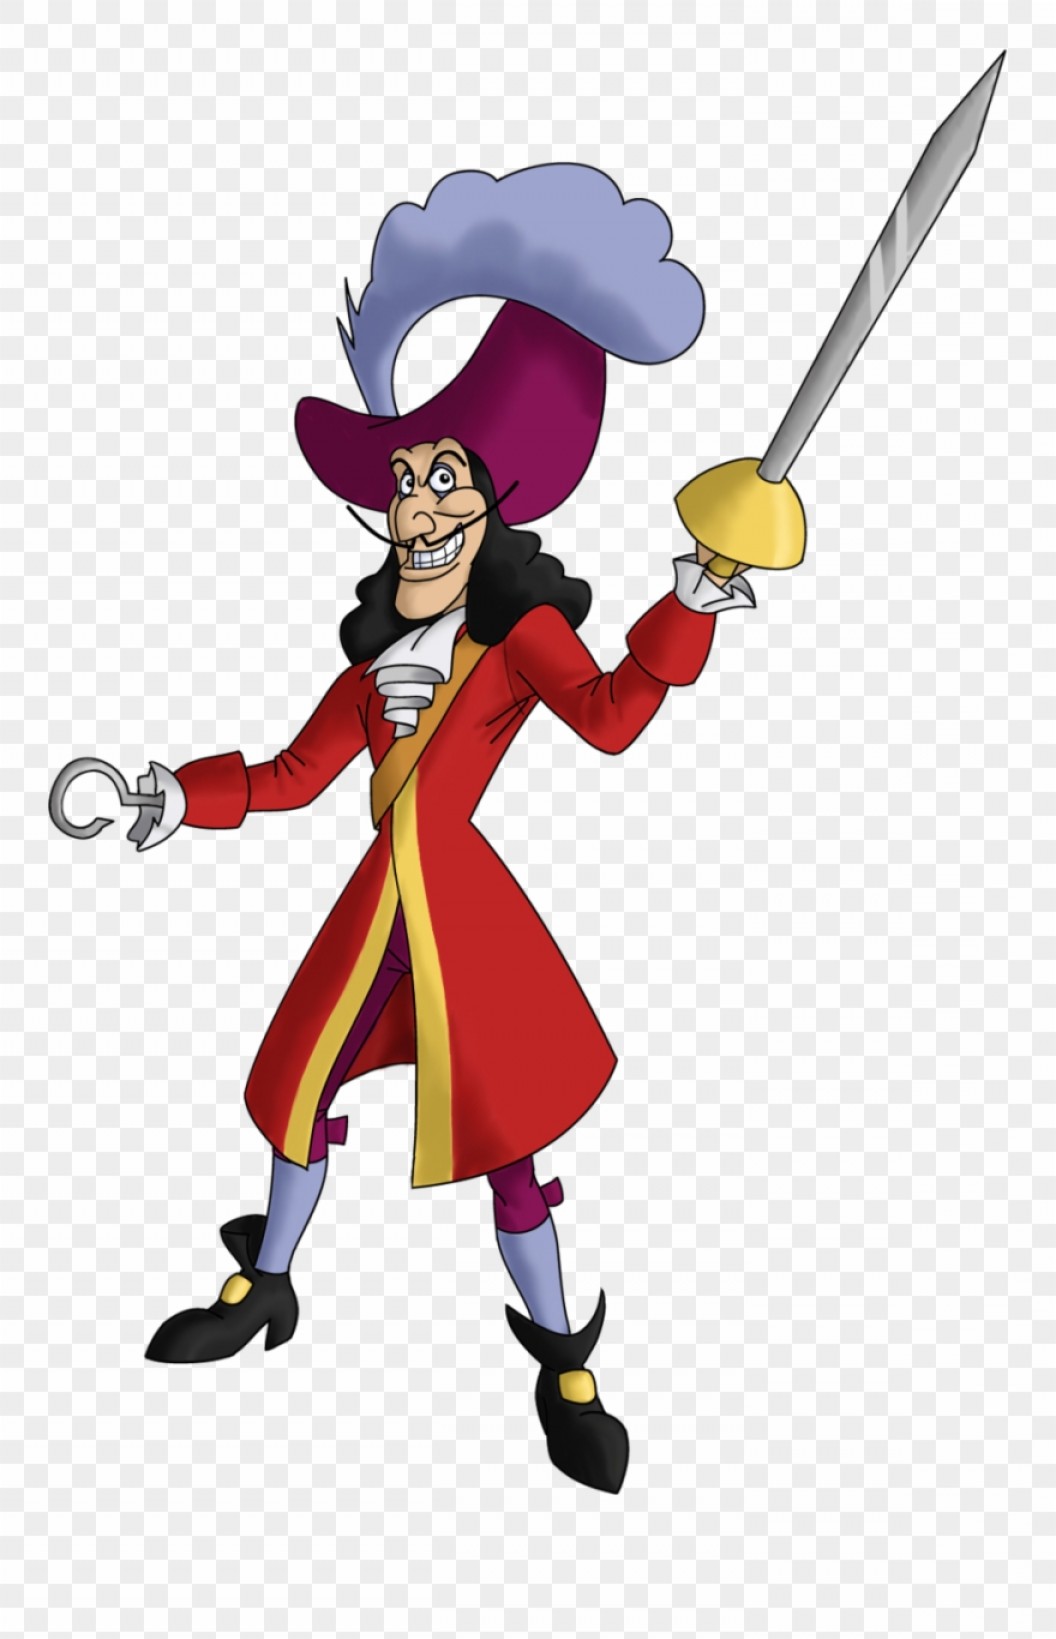 hook clipart character